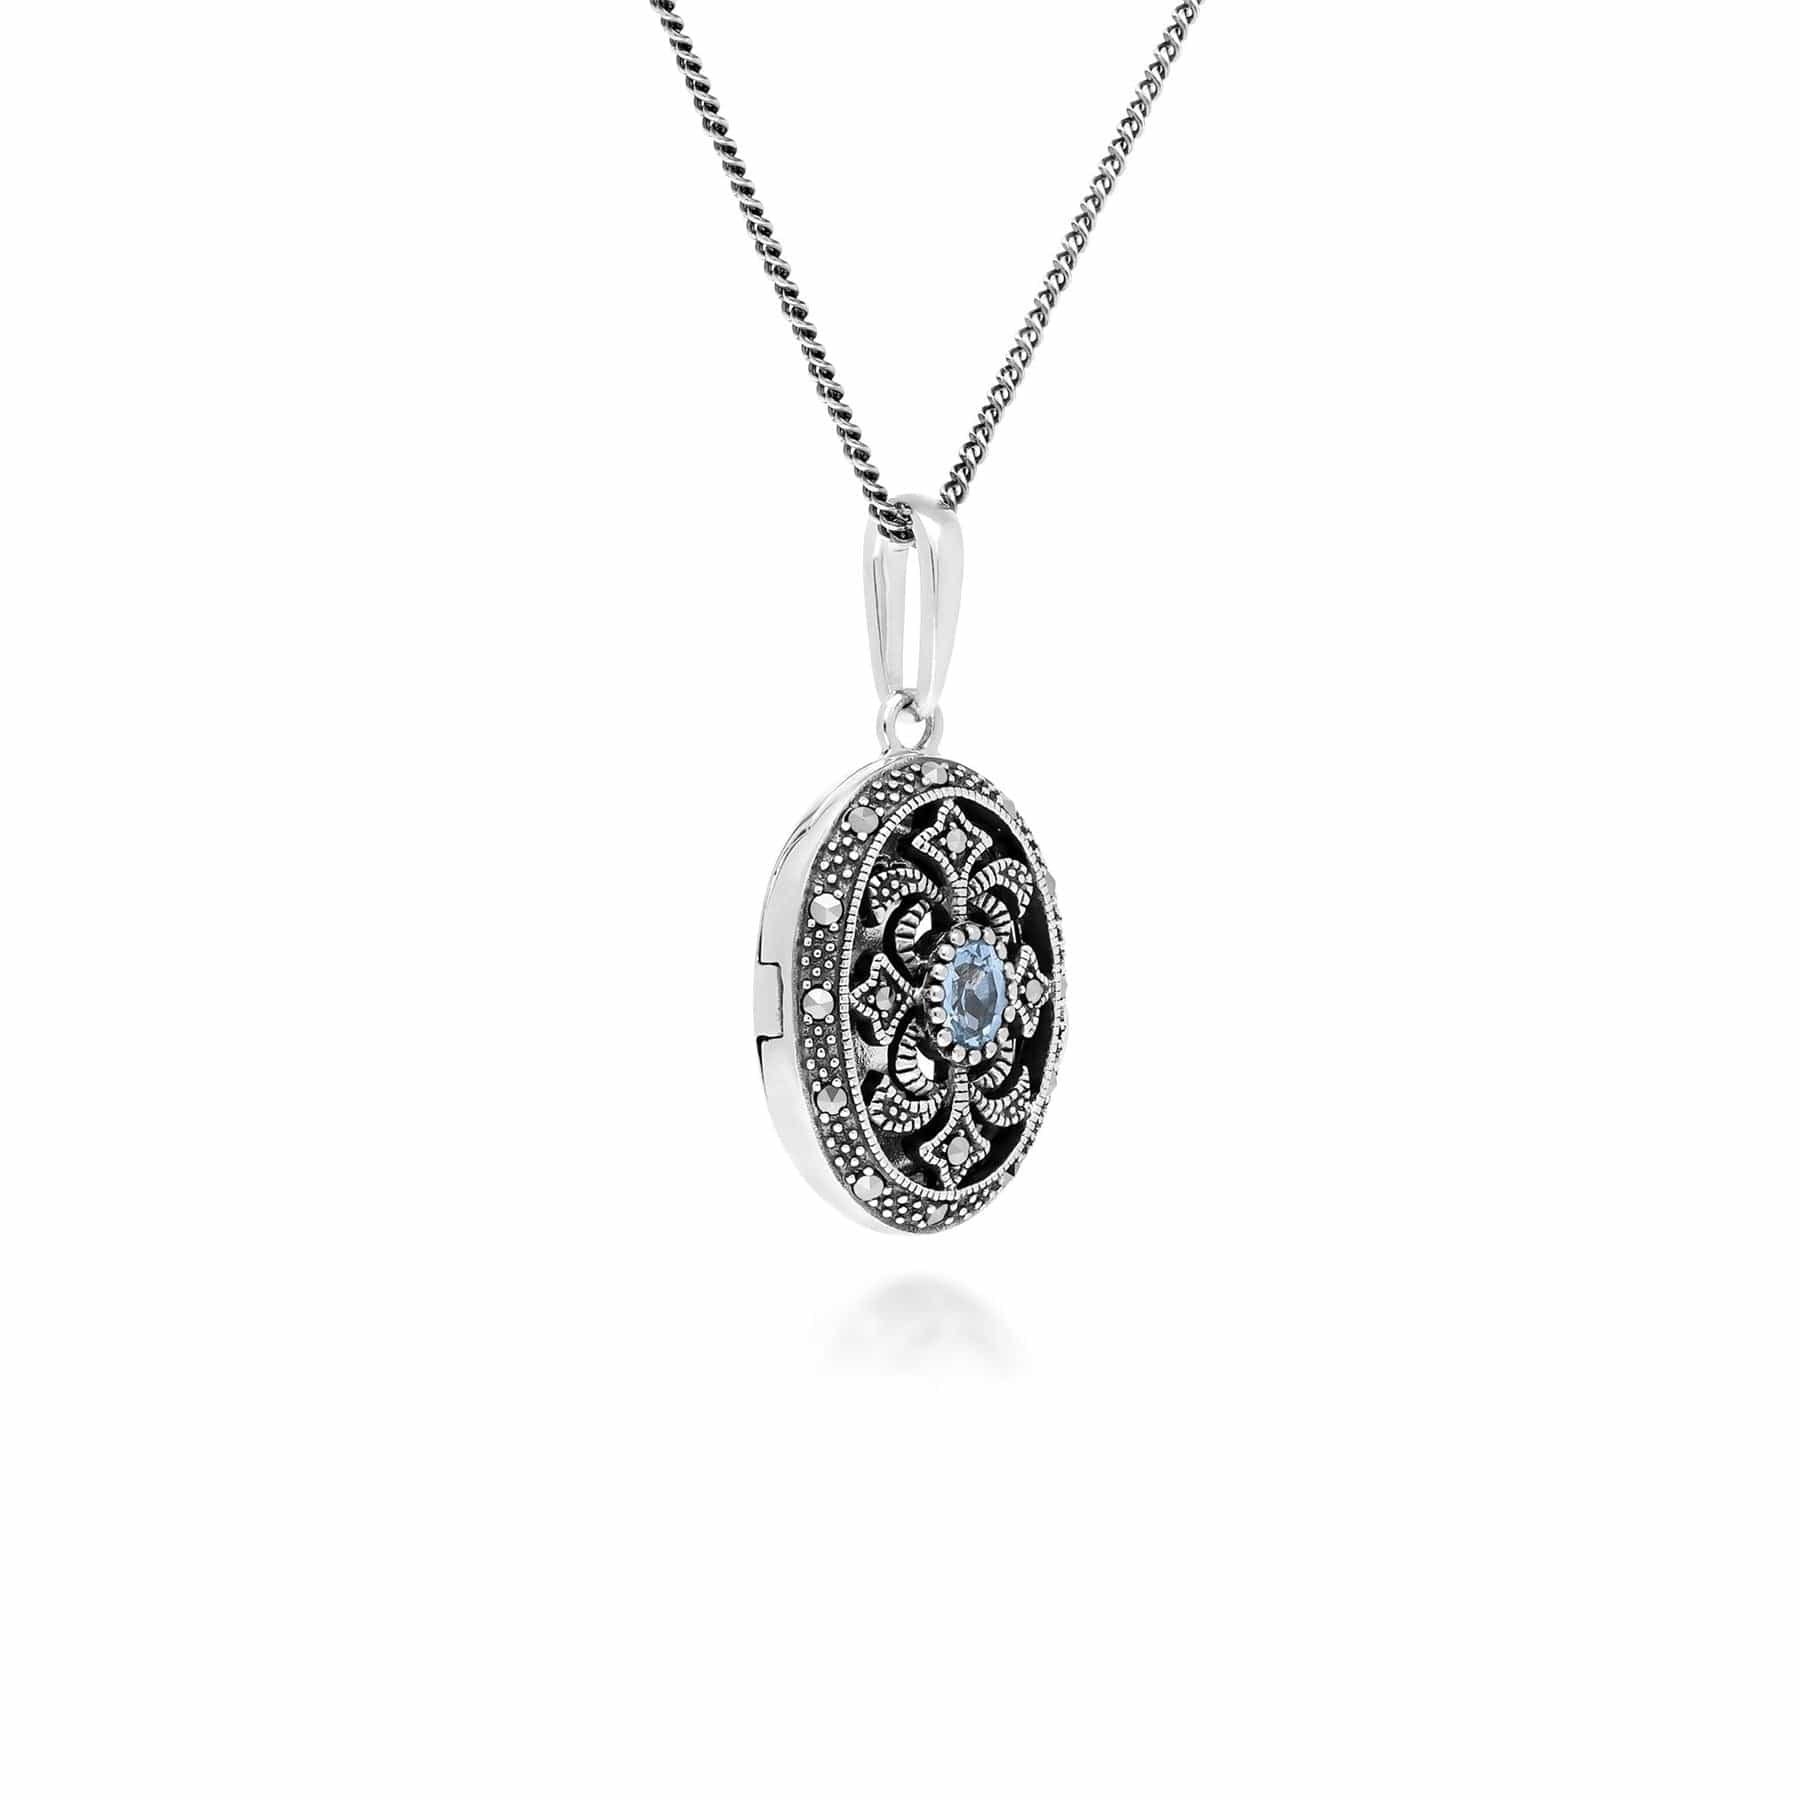 214N716206925 Art Nouveau Style Oval Aquamarine & Marcasite Locket Necklace in 925 Sterling Silver 2